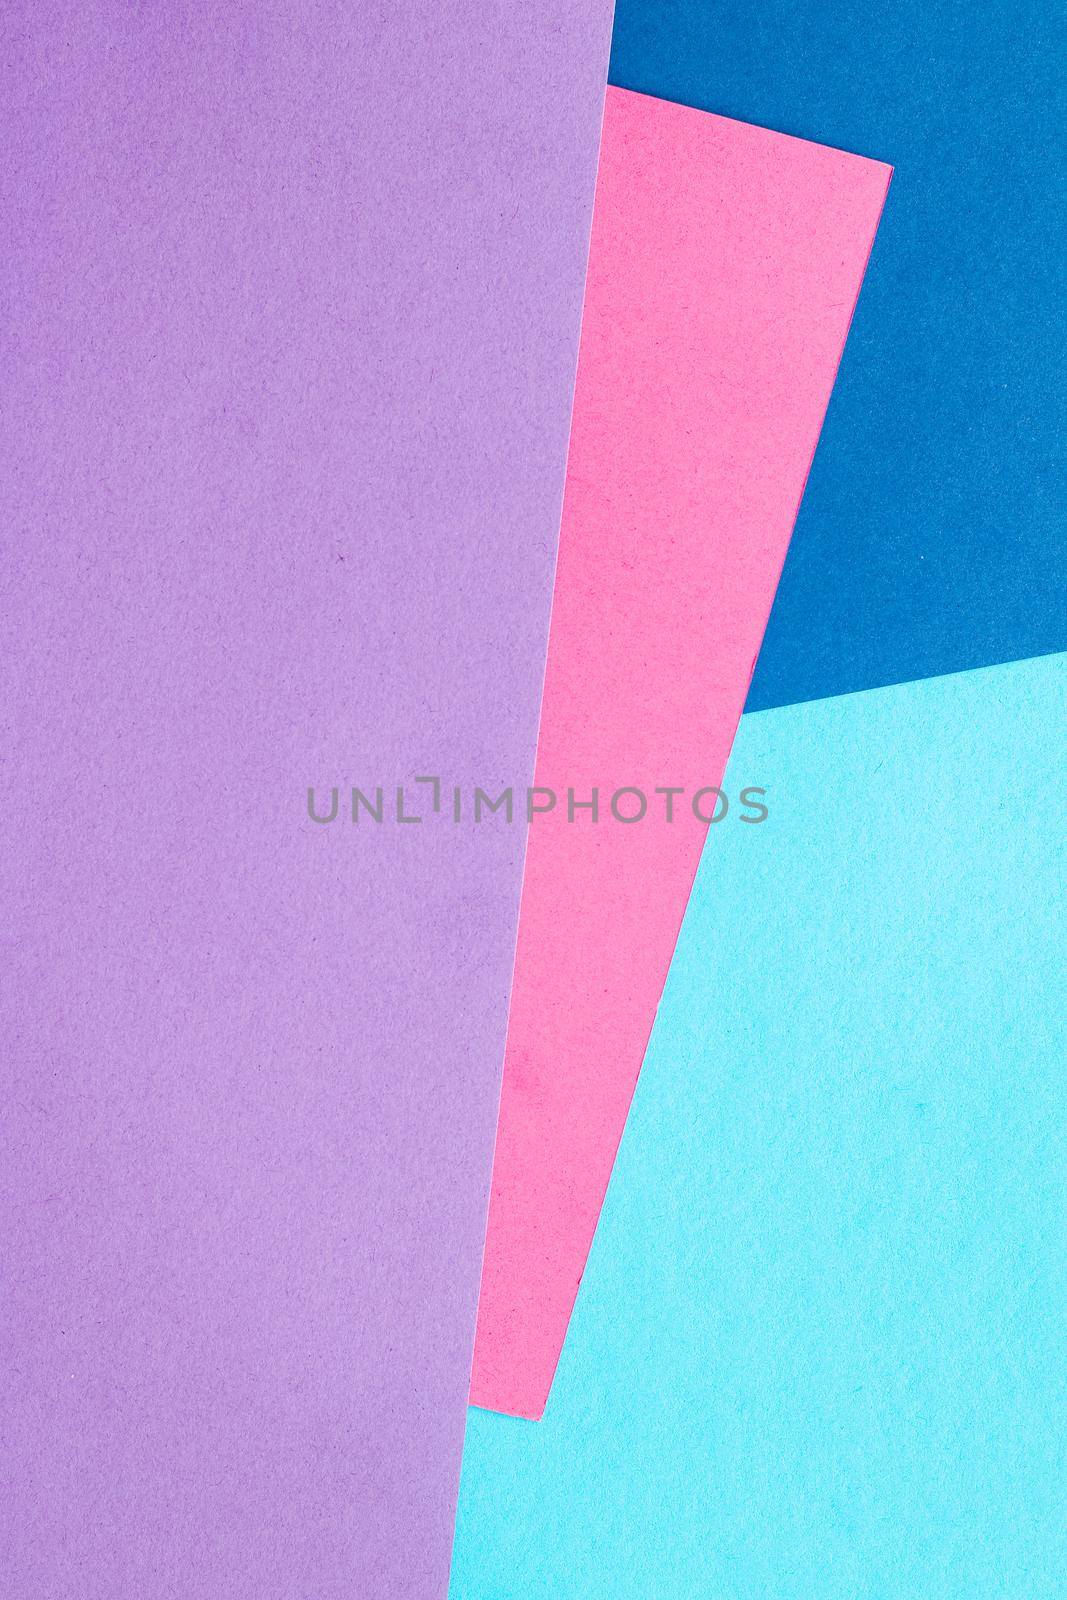 Blank paper texture as background. You are ready to create